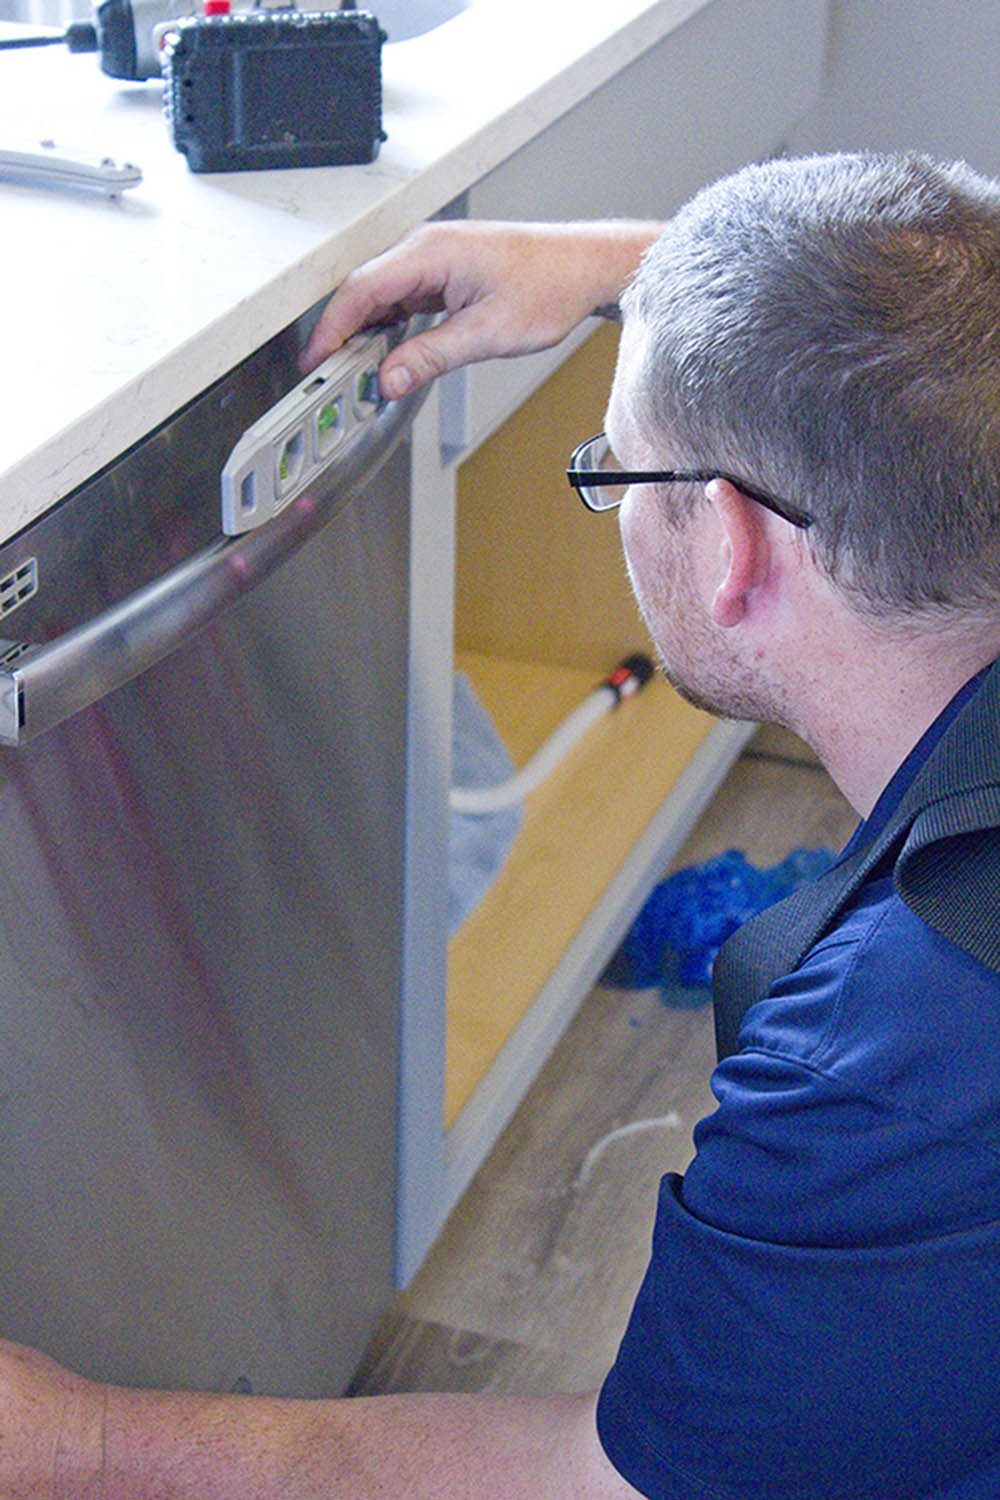 A man installing and leveling a dishwasher inside a home.